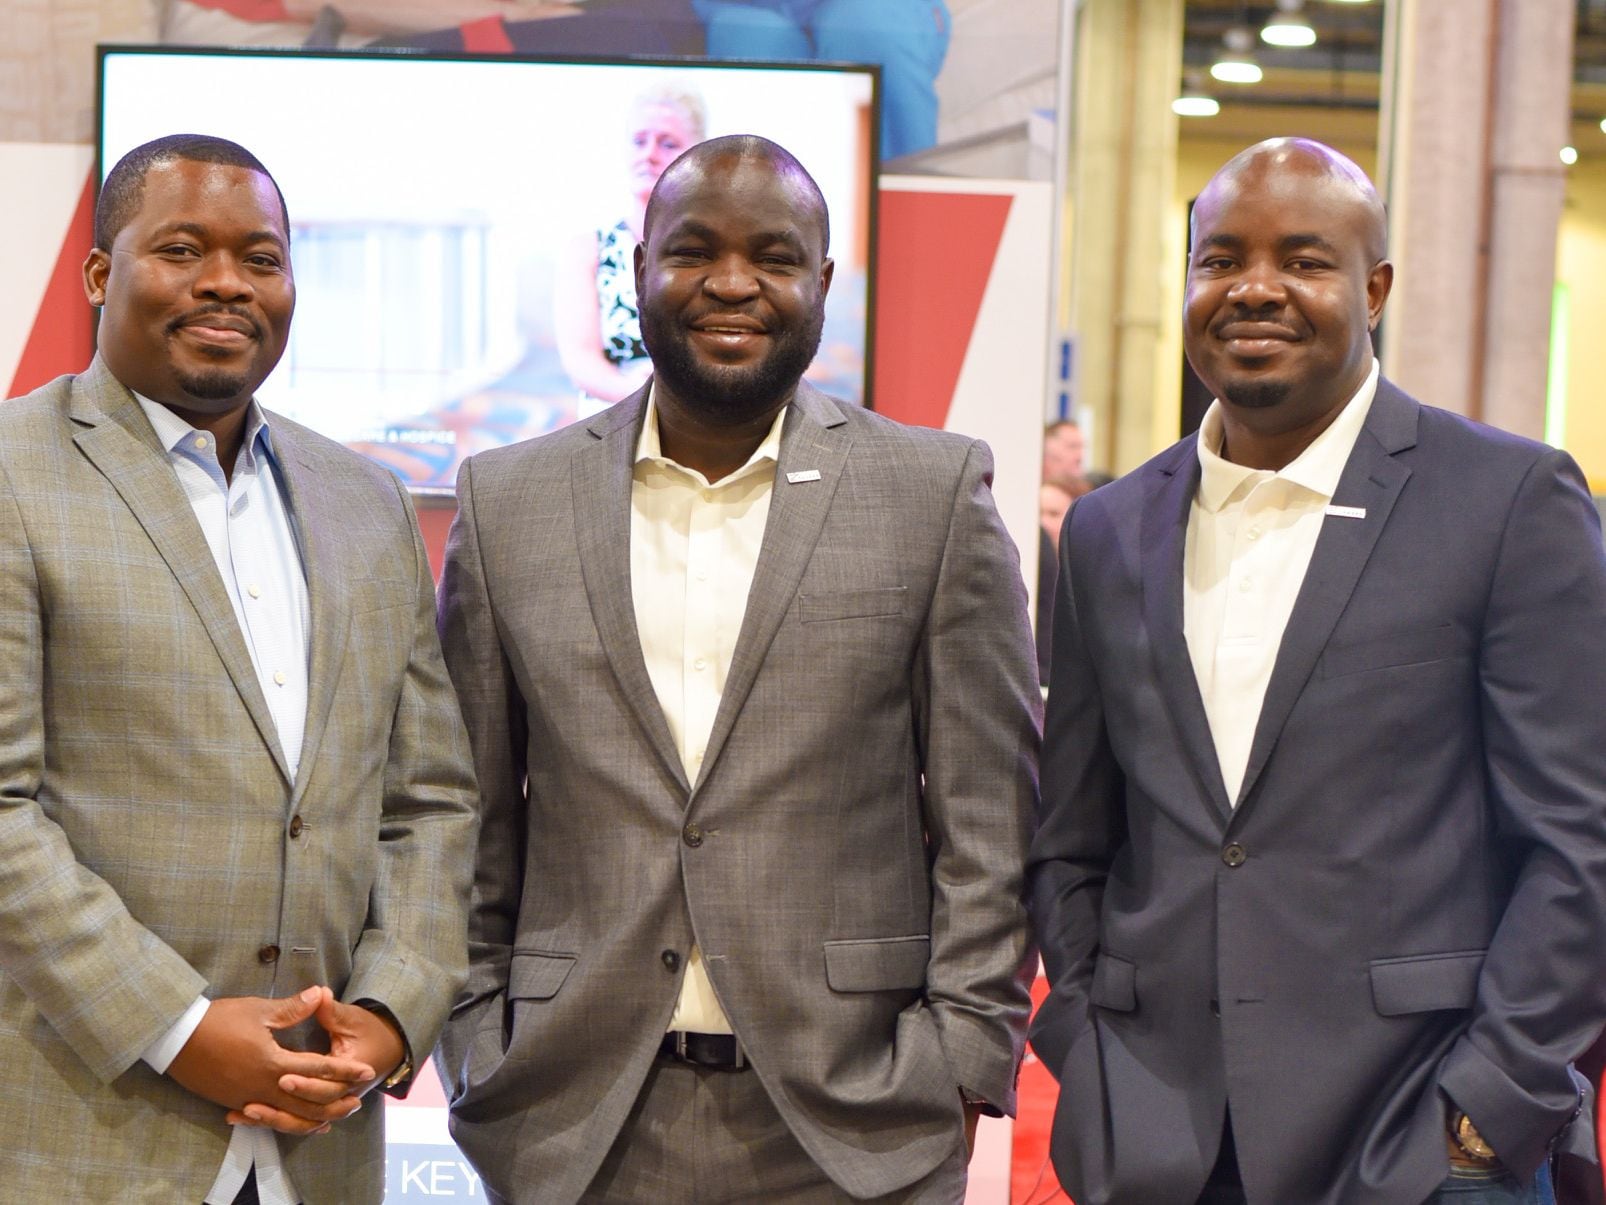 Axxess Technology is run by John Olajide (center) and his minority partners Andrew Olowu...